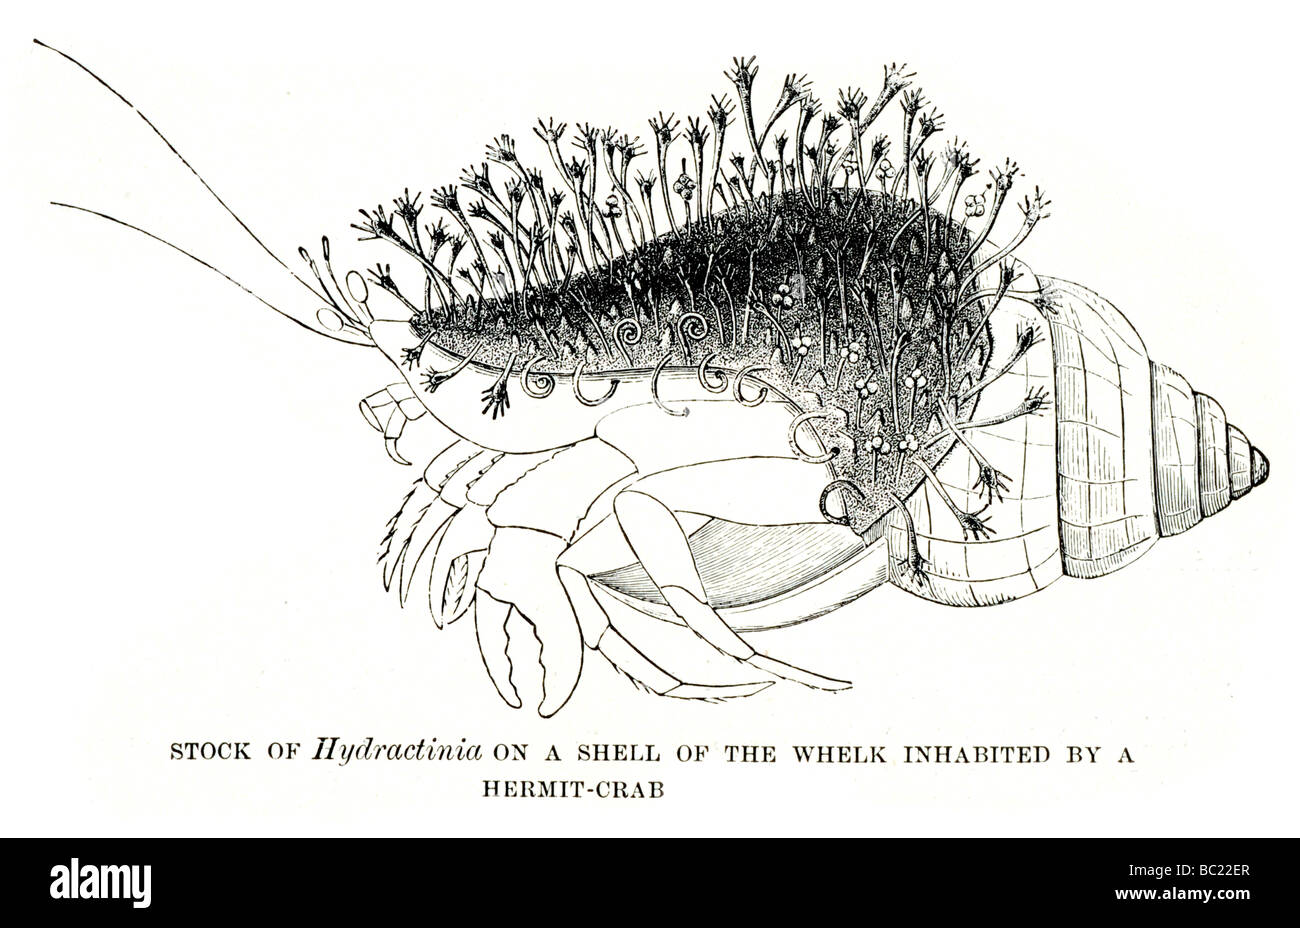 stock of hydractinia on a shell of the whelk inhabited by a hermit crab Stock Photo